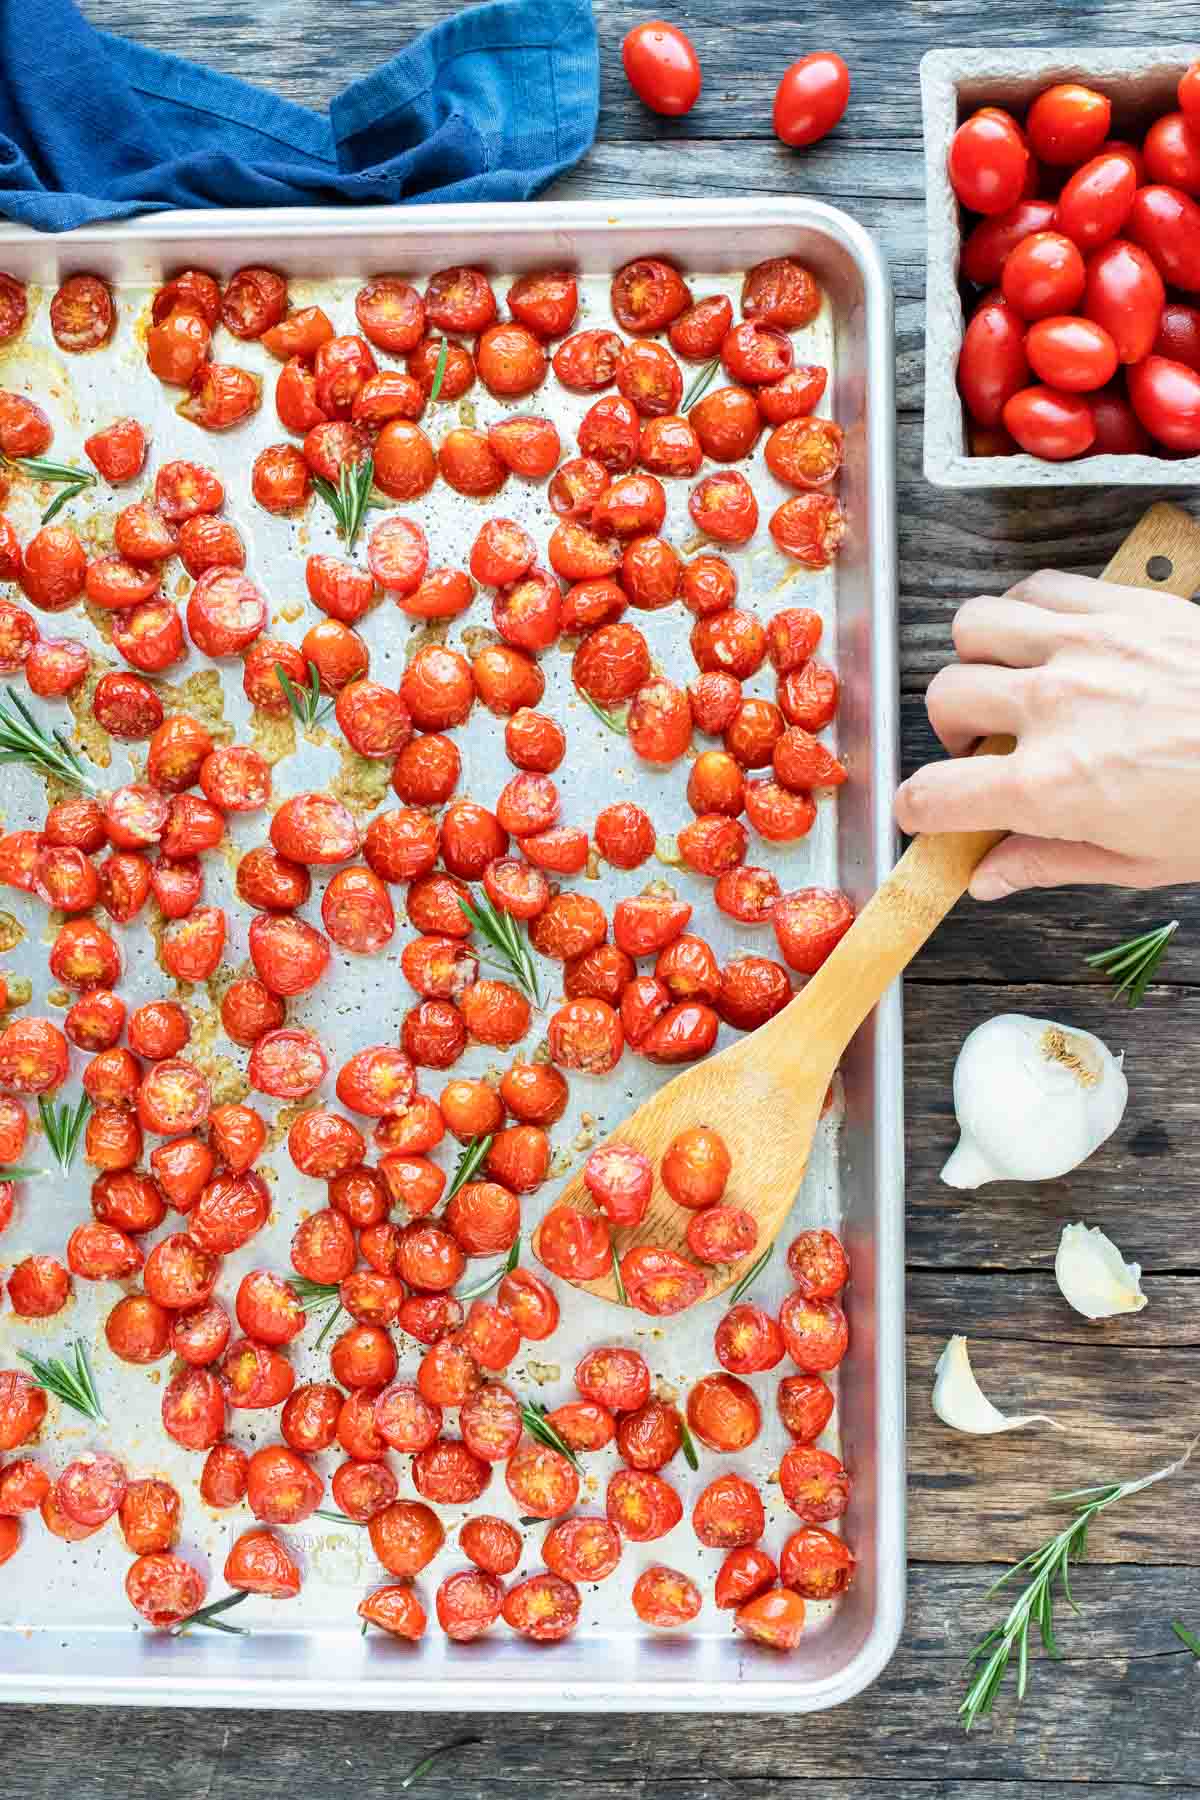 Roasted cherry tomatoes on a large baking sheet with a hand scooping up some.